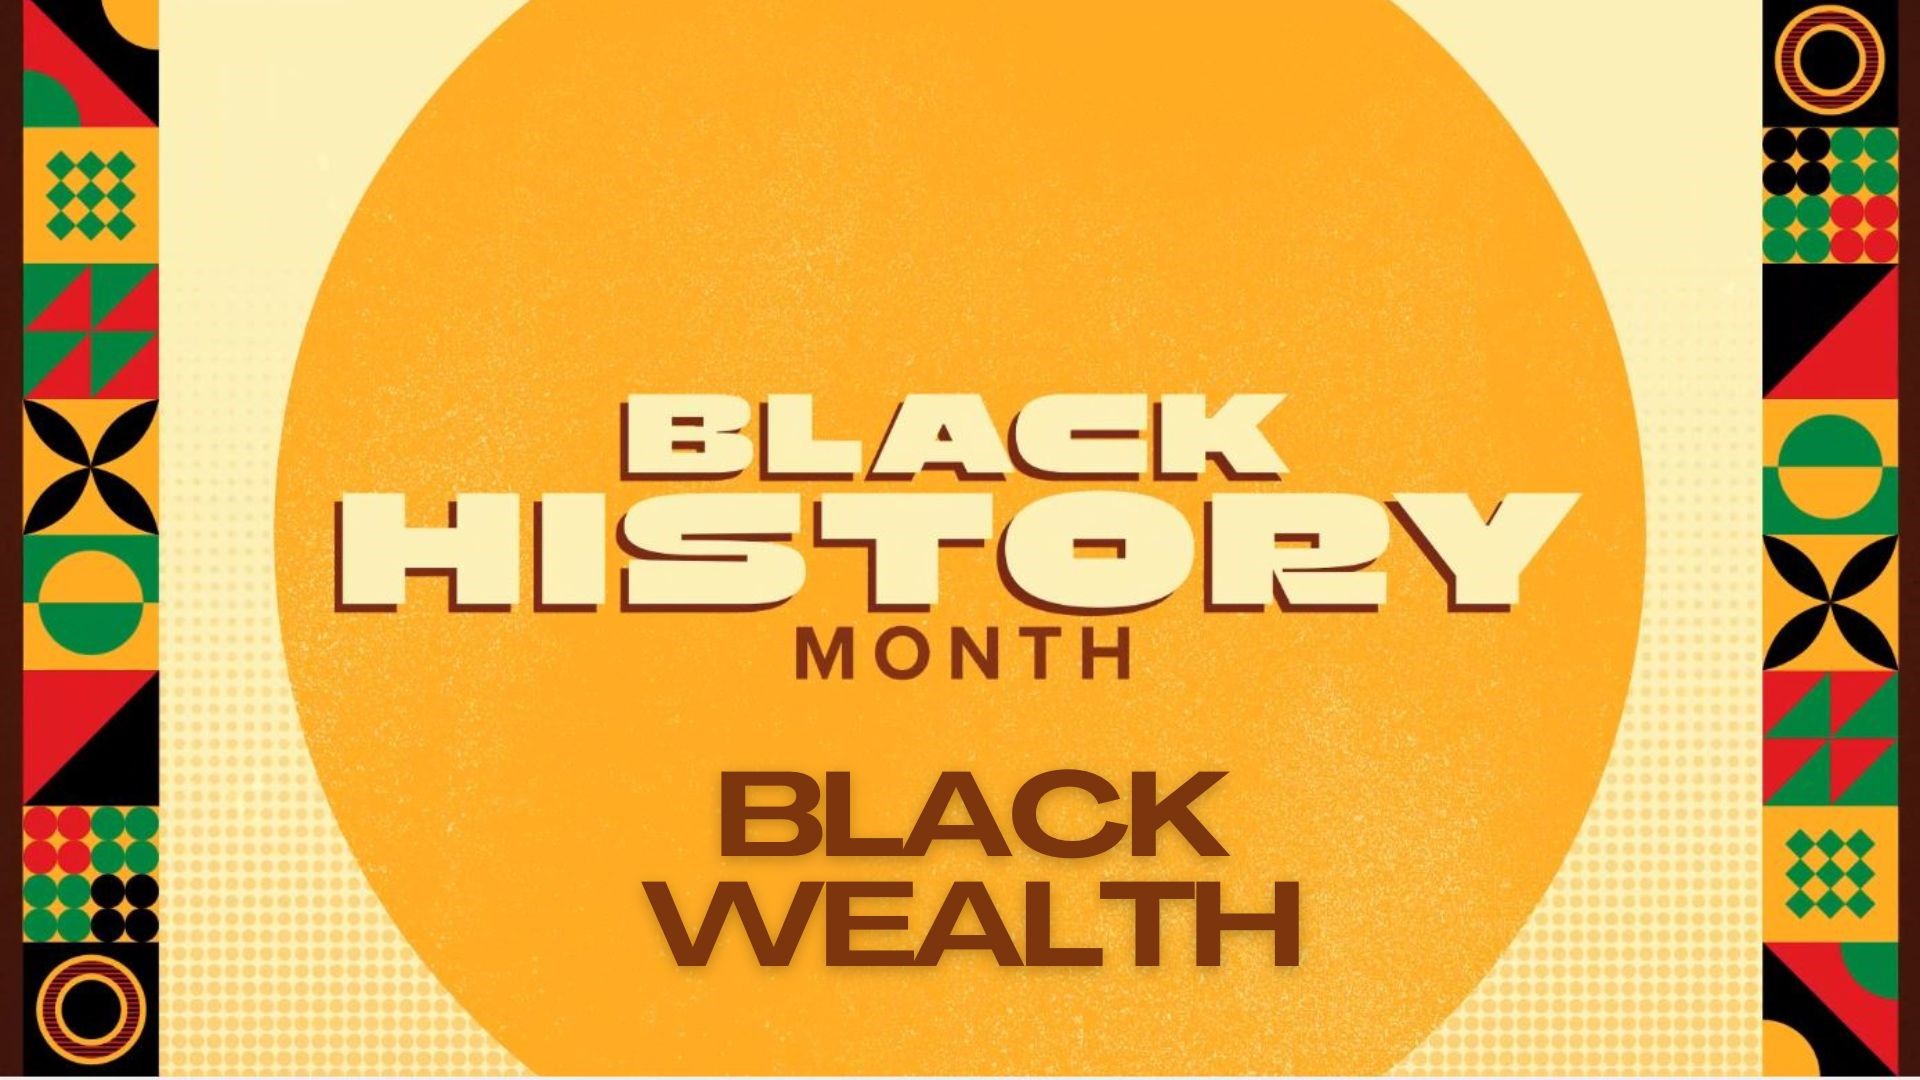 Exploring the wealth gap and sharing tips on building wealth in Black communities. Plus, looking into states working on reparations.